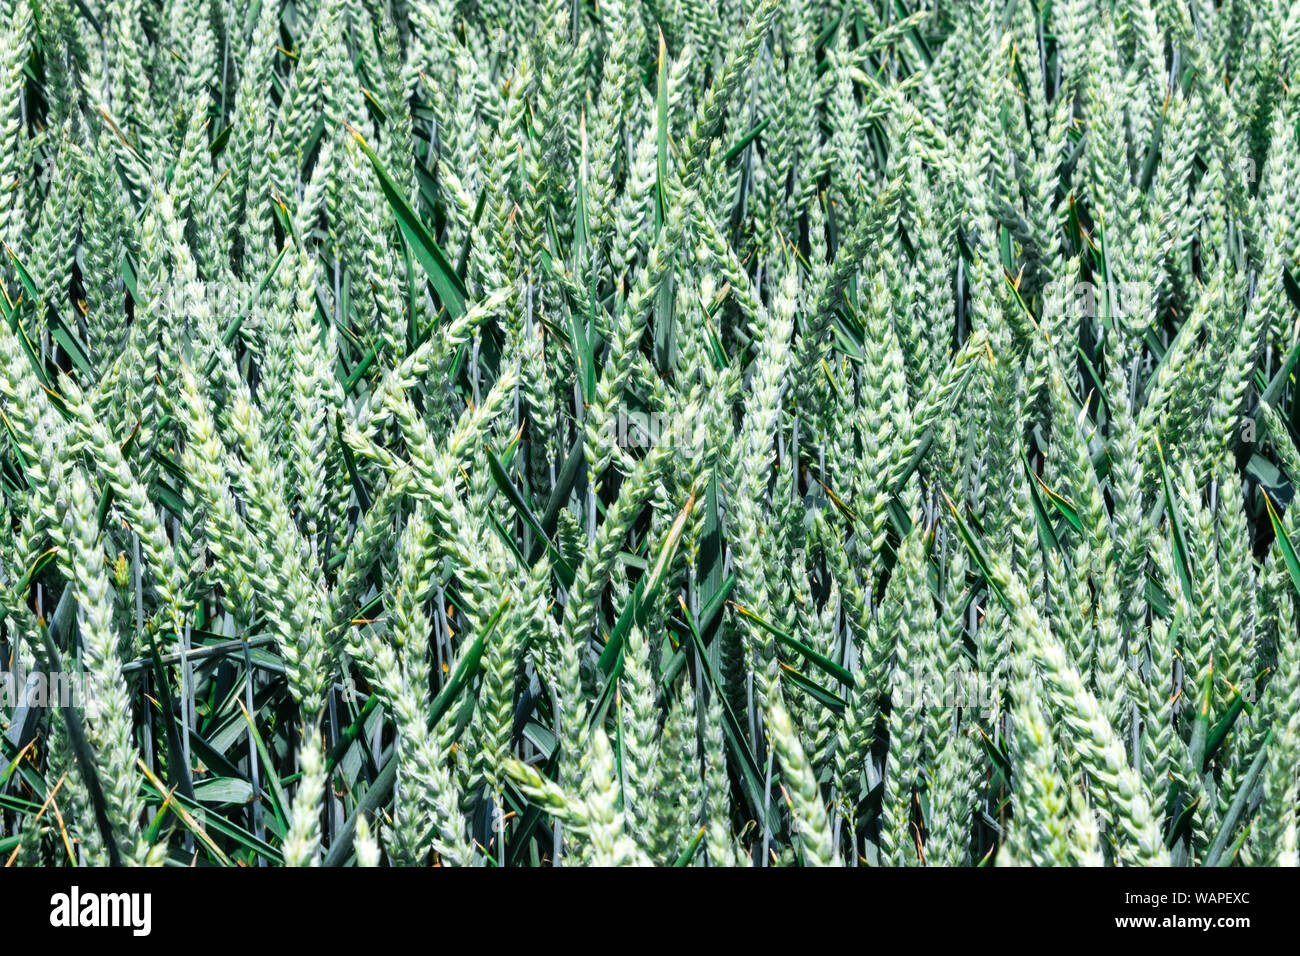 young organic wheat field growing during summer before harvesting Stock Photo